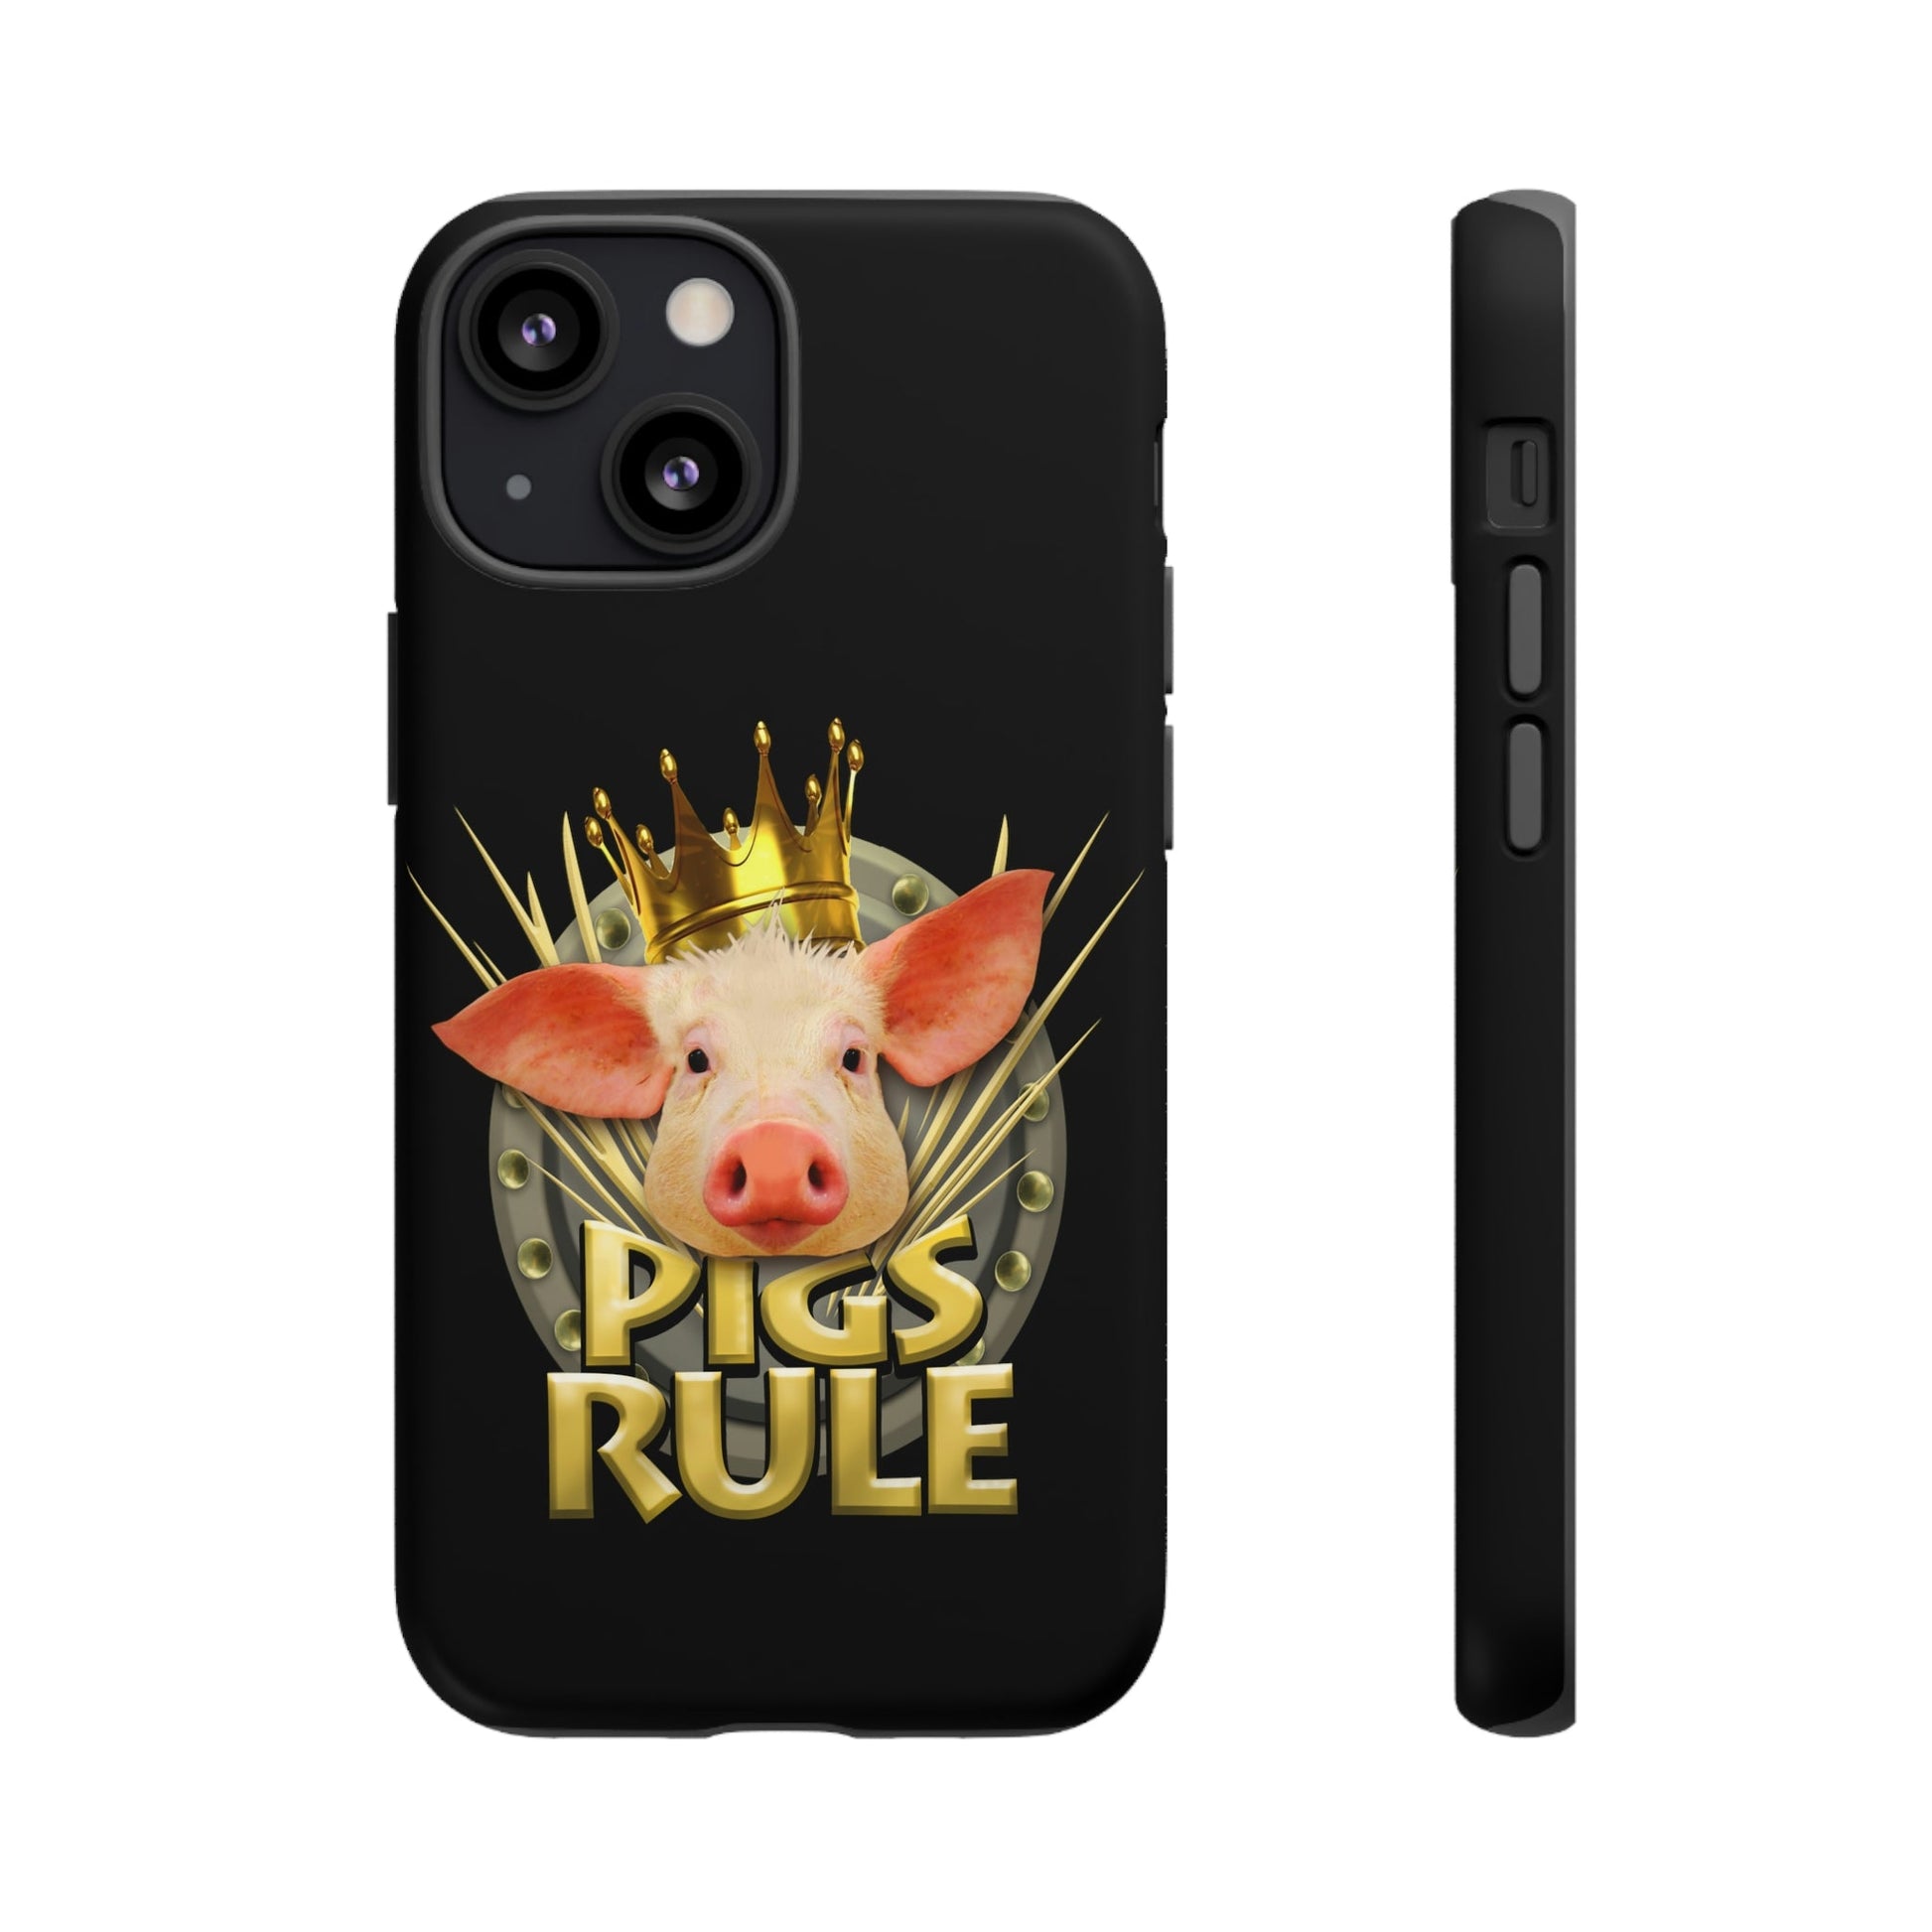 Pigs Rule Tough Cases for most phone models